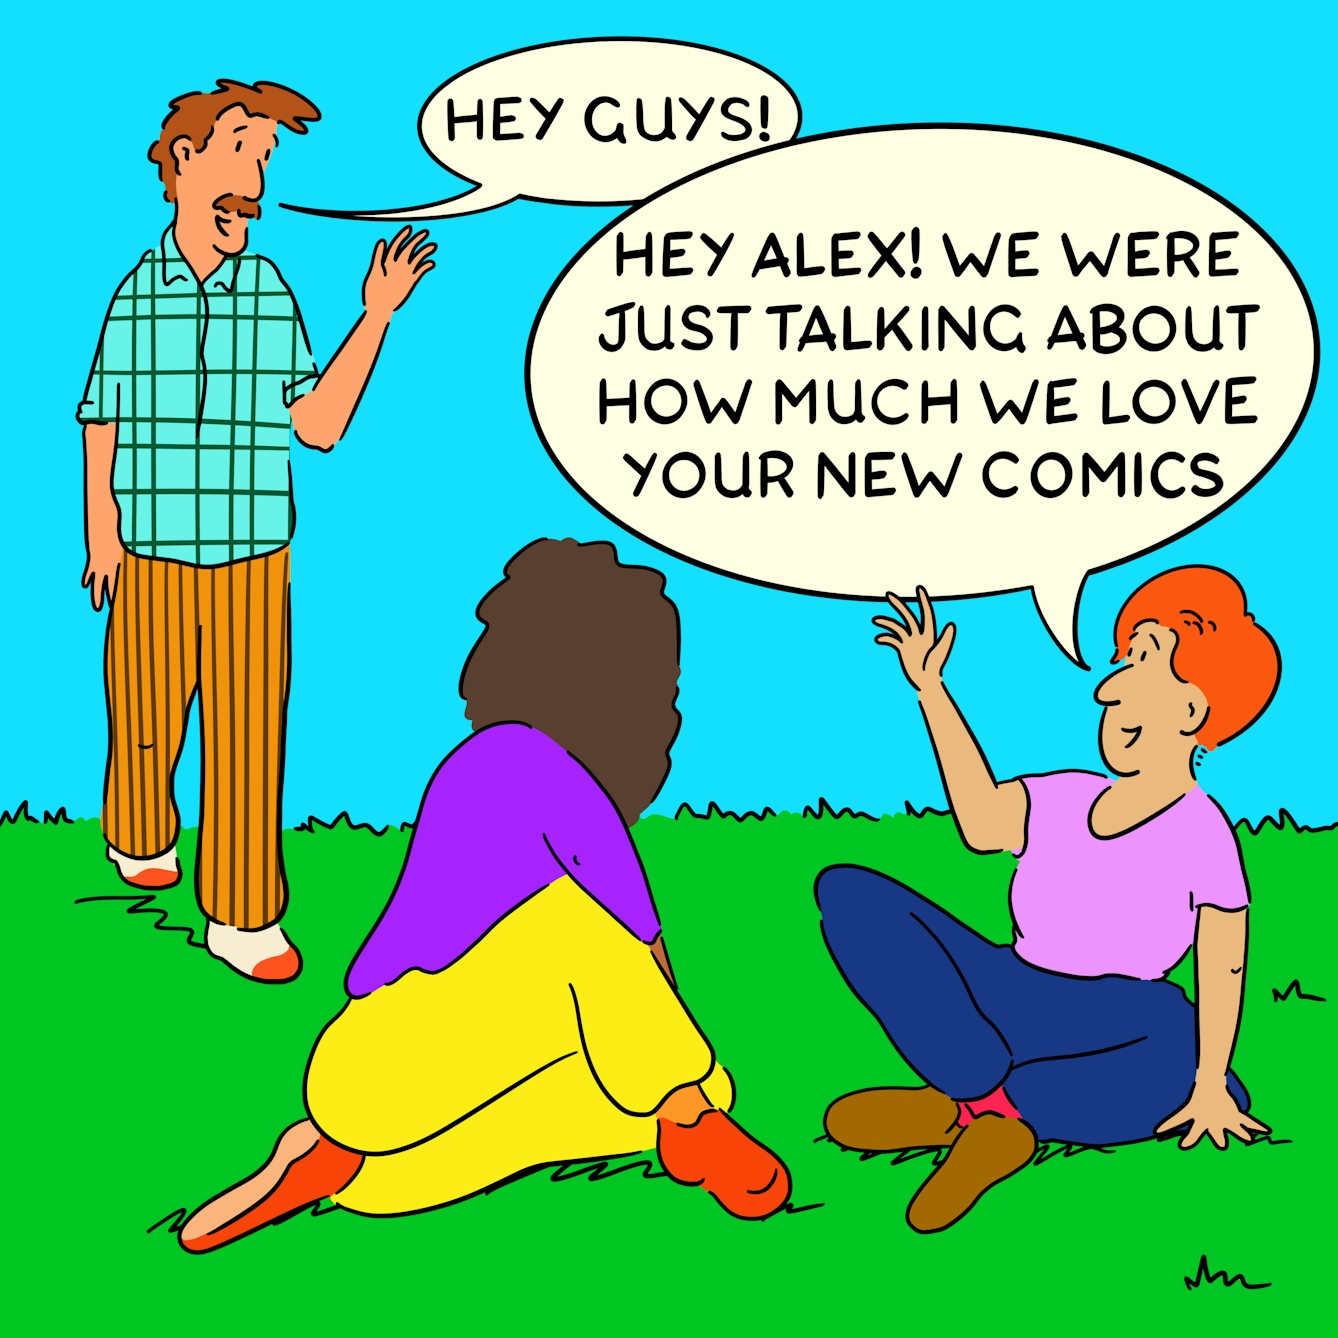 Panel 3 of a four-panel comic drawn digitally: Two people sit on the grass and one man (Alex) wearing a plaid shirt and corduroy trousers walks up behind them saying "Hey guys!". The sitting person with white skin, short red hair and a pink t-shirt says "Hey Alex! We were just talking about how much we love your new comics".